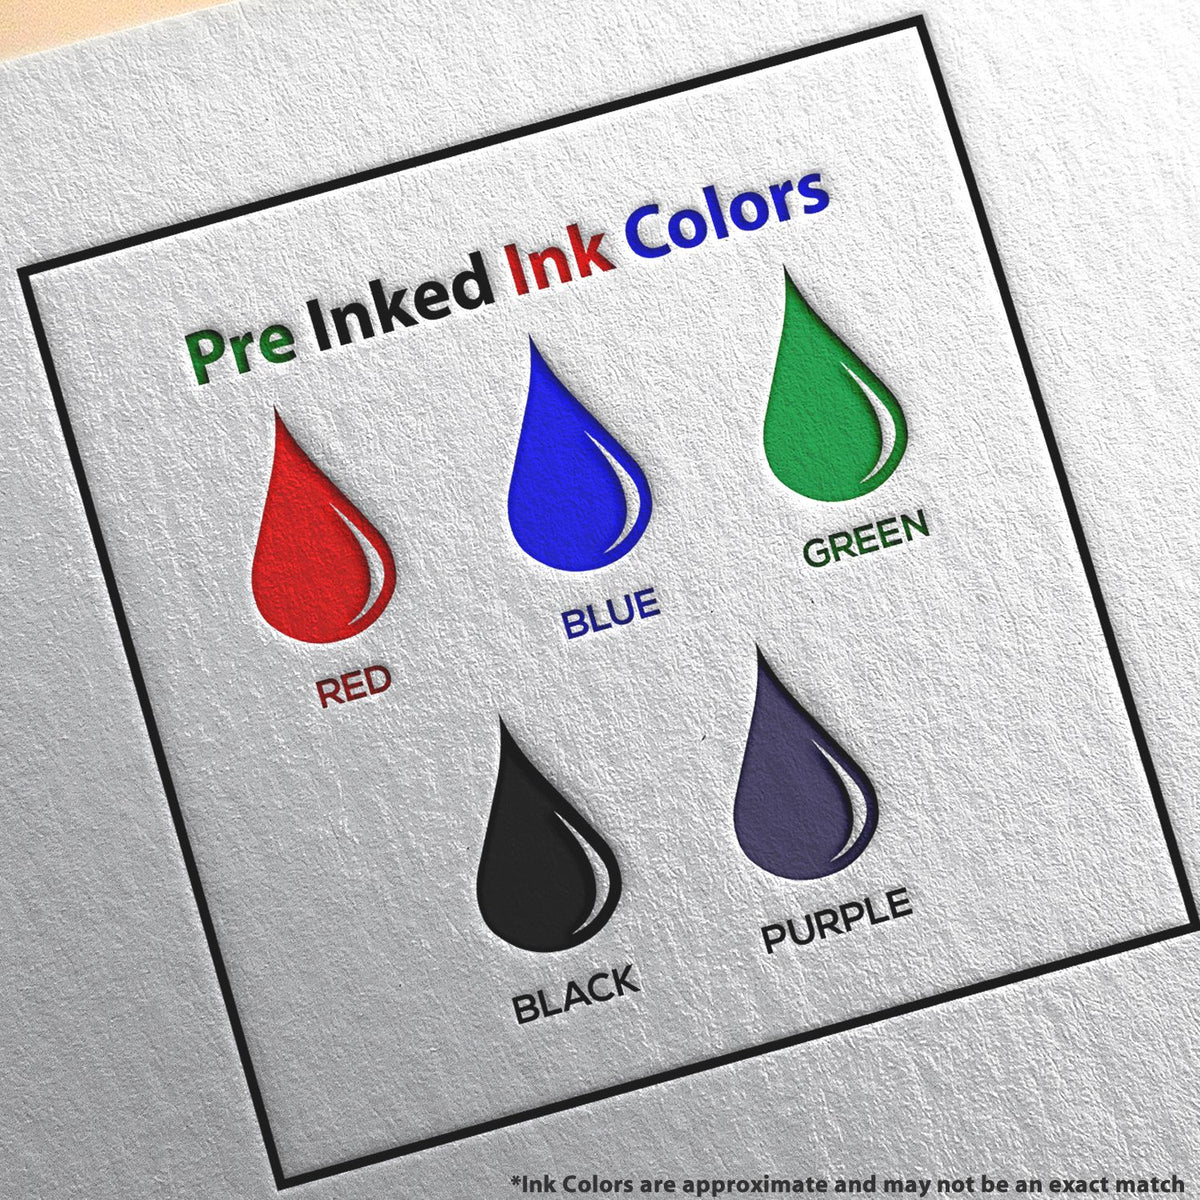 A picture showing the different ink colors or hues available for the Slim Pre-Inked District of Columbia Landscape Architect Seal Stamp product.